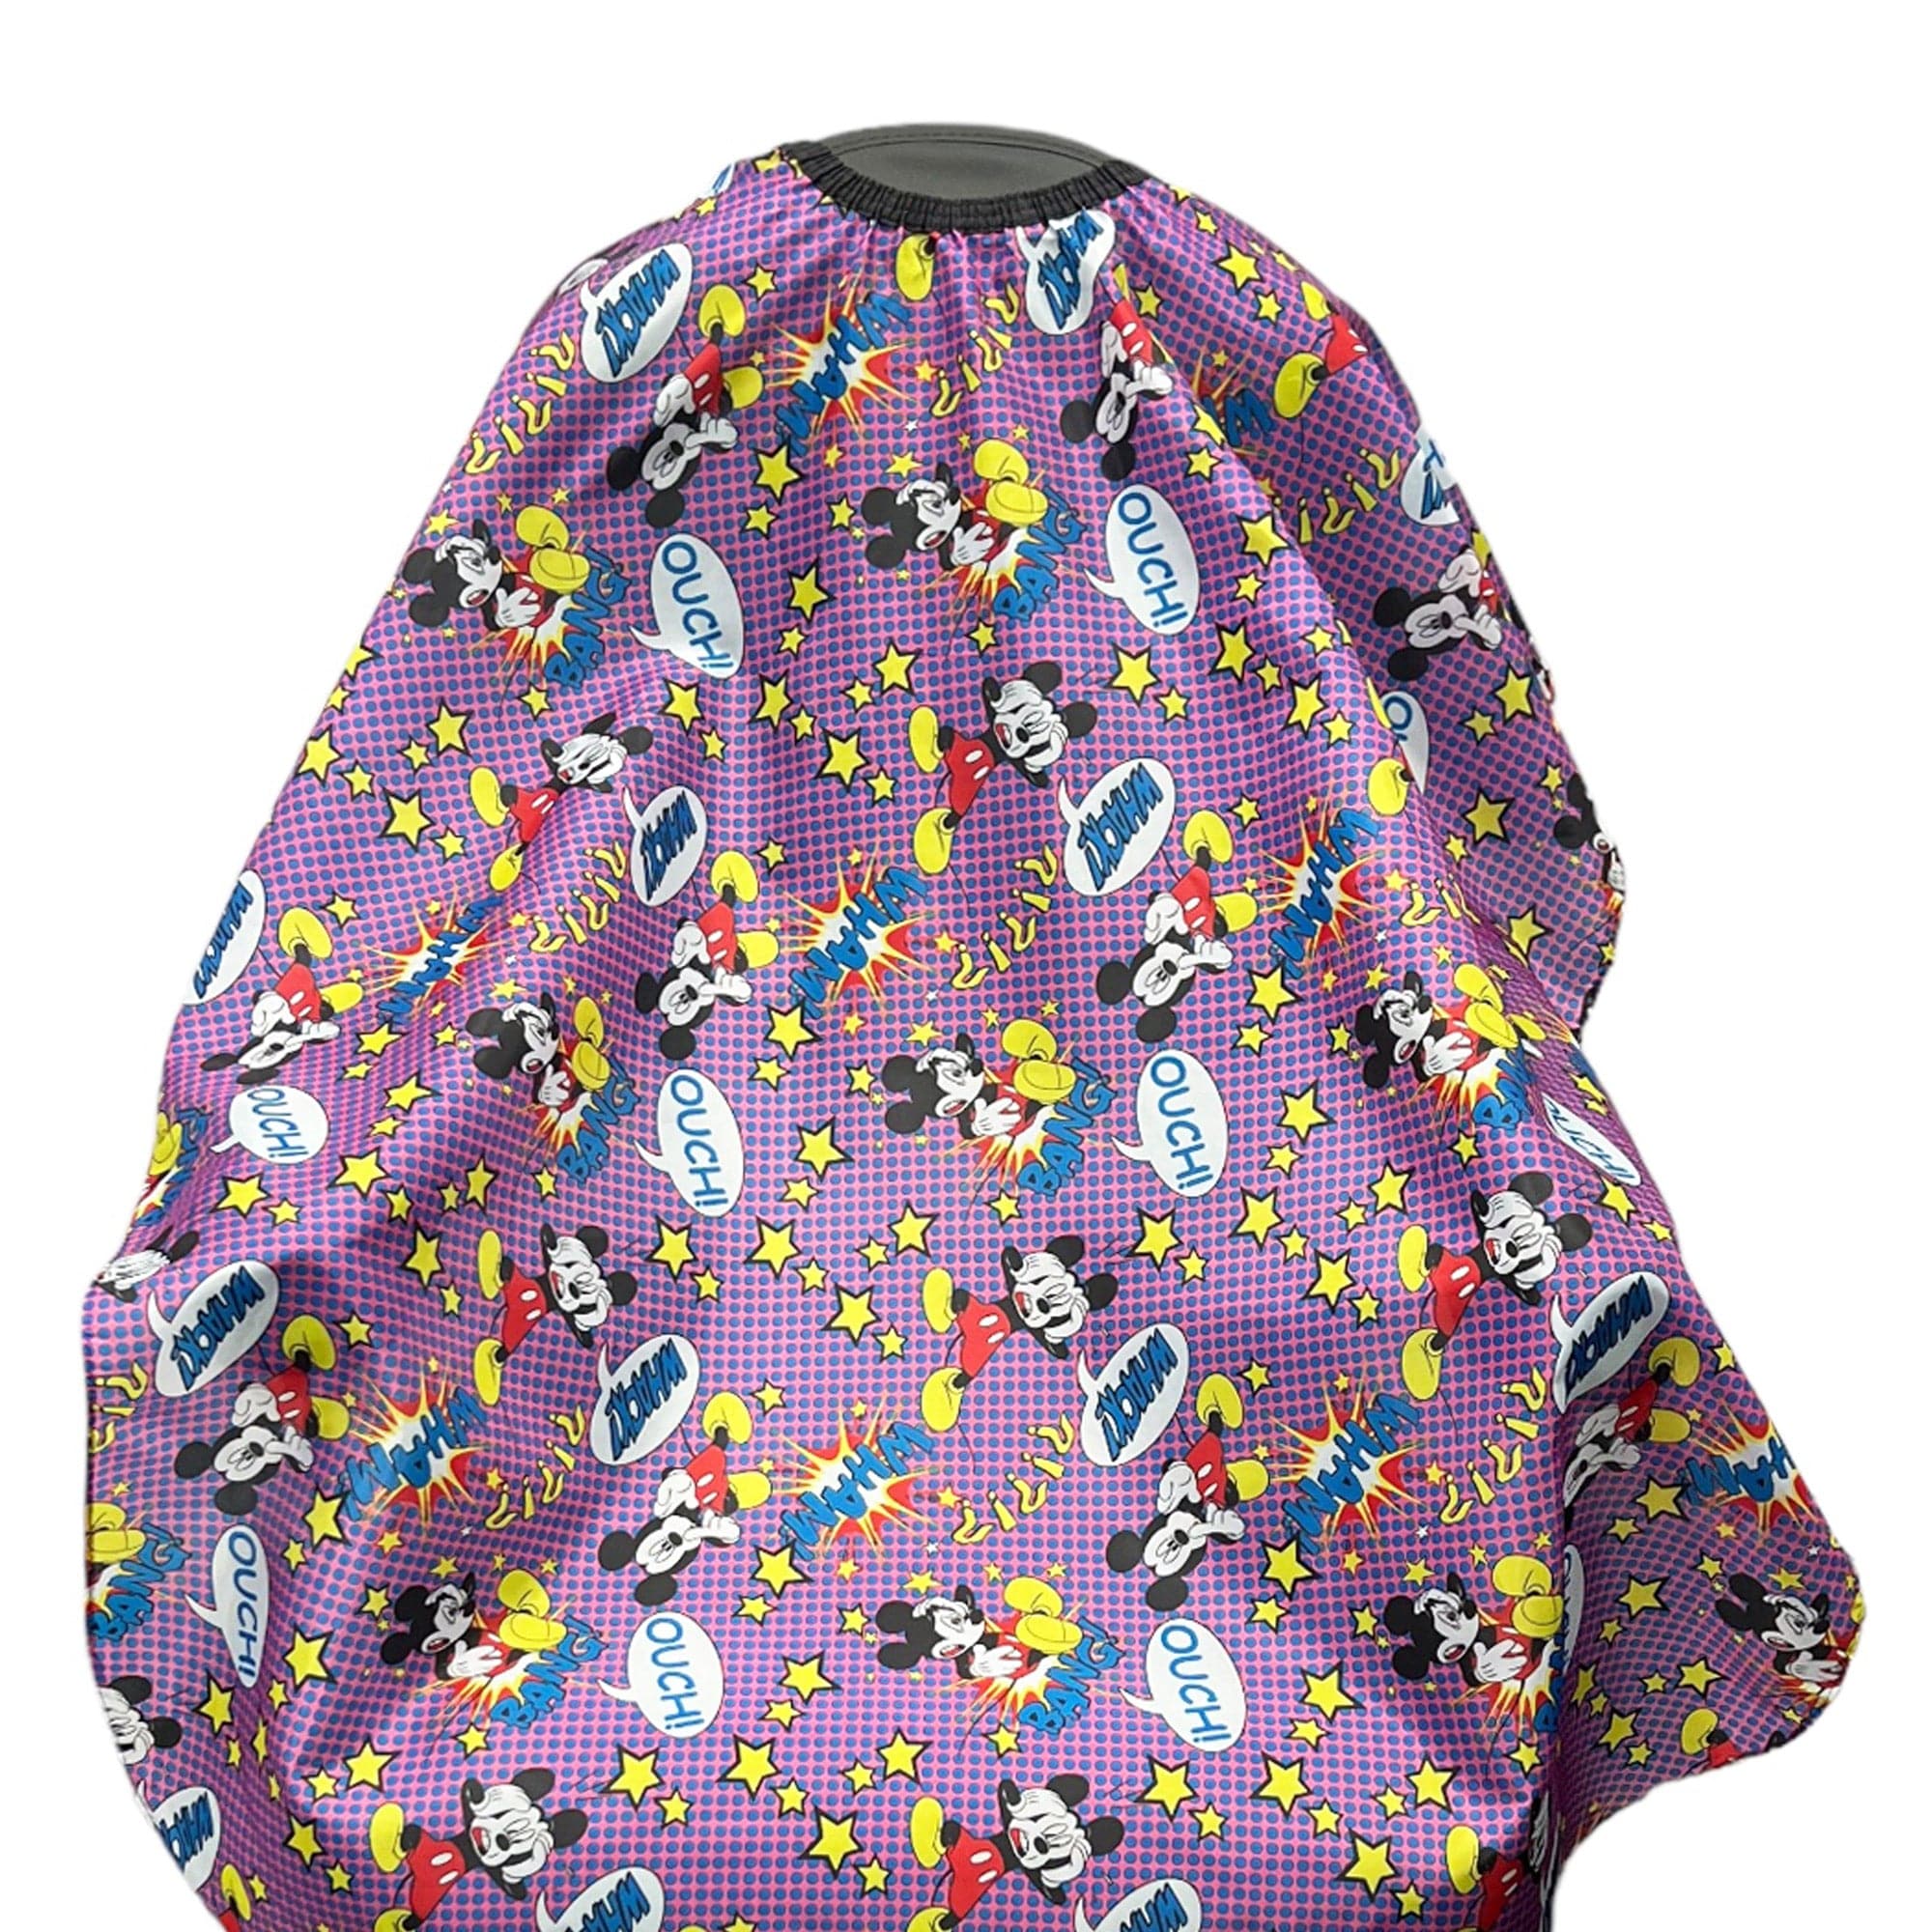 Gabri - Barber Hairdressing Kids Hair Cutting Capes & Gowns Mickey Mouse Pattern